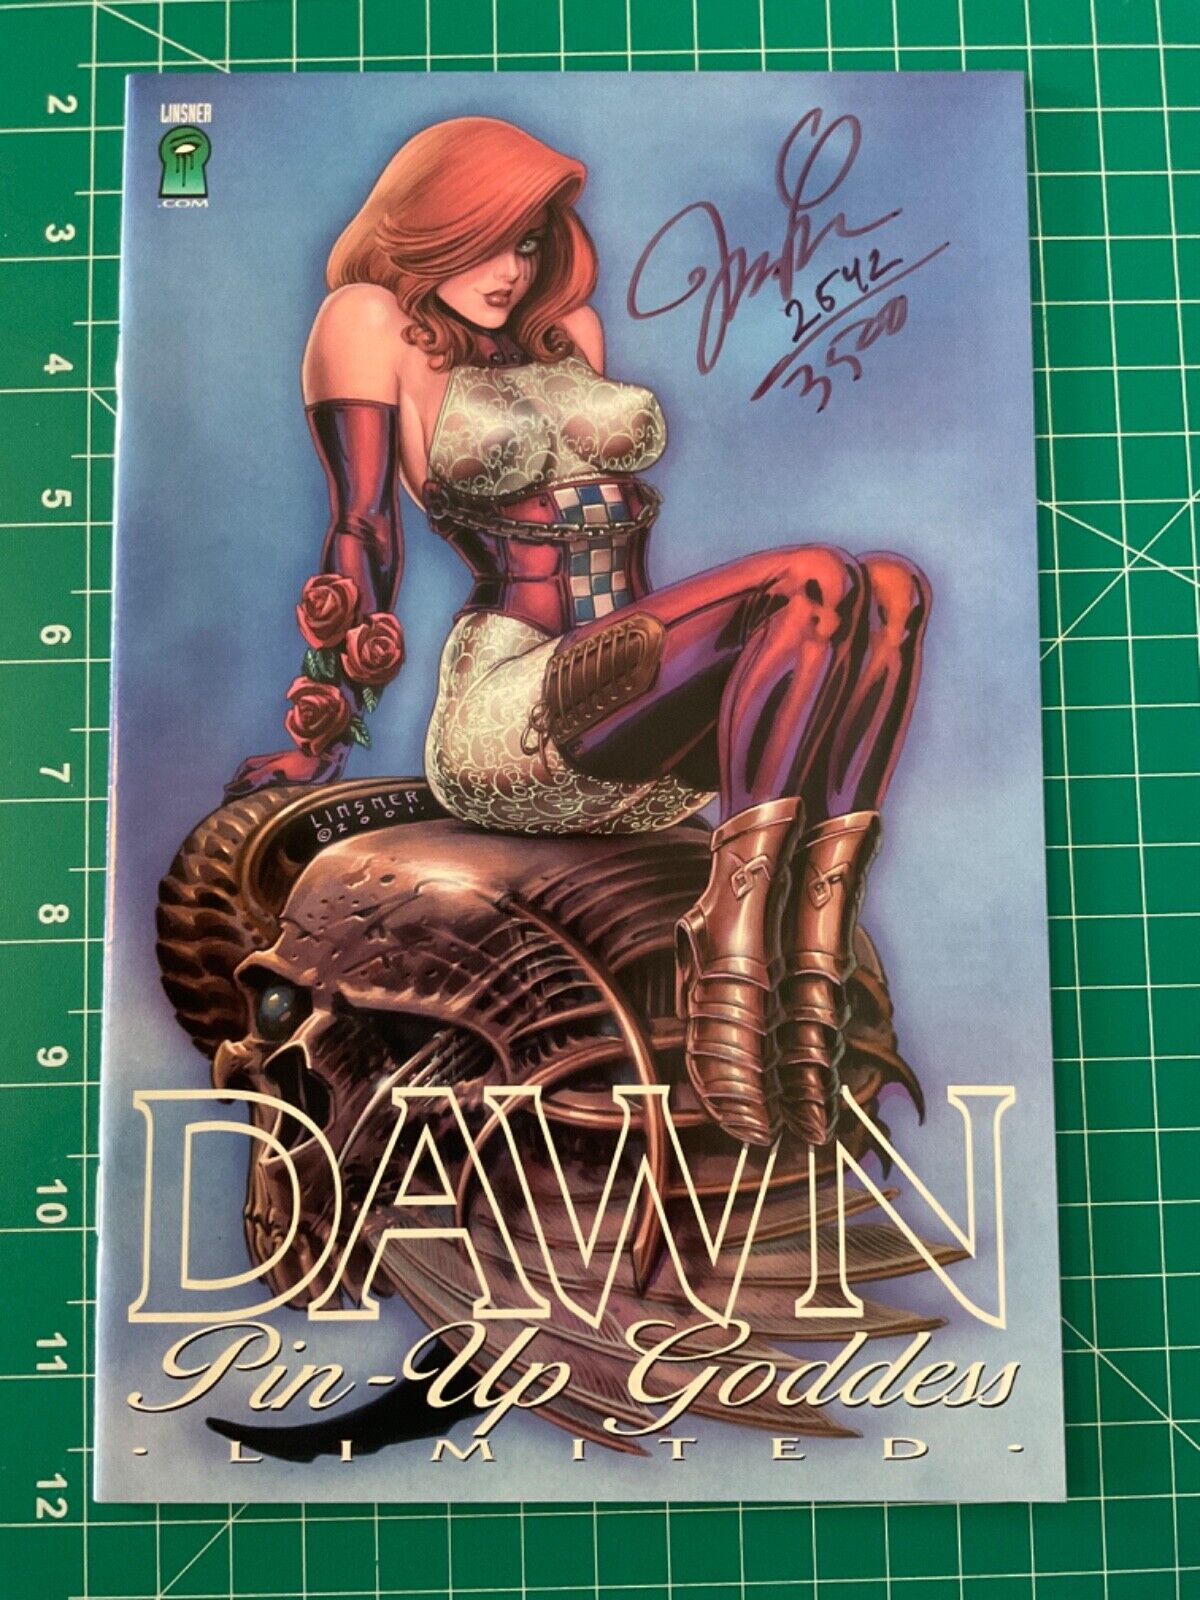 DAWN PIN-UP GODDESS #1 NM Signed by Joseph Linsner Limited, Numbered